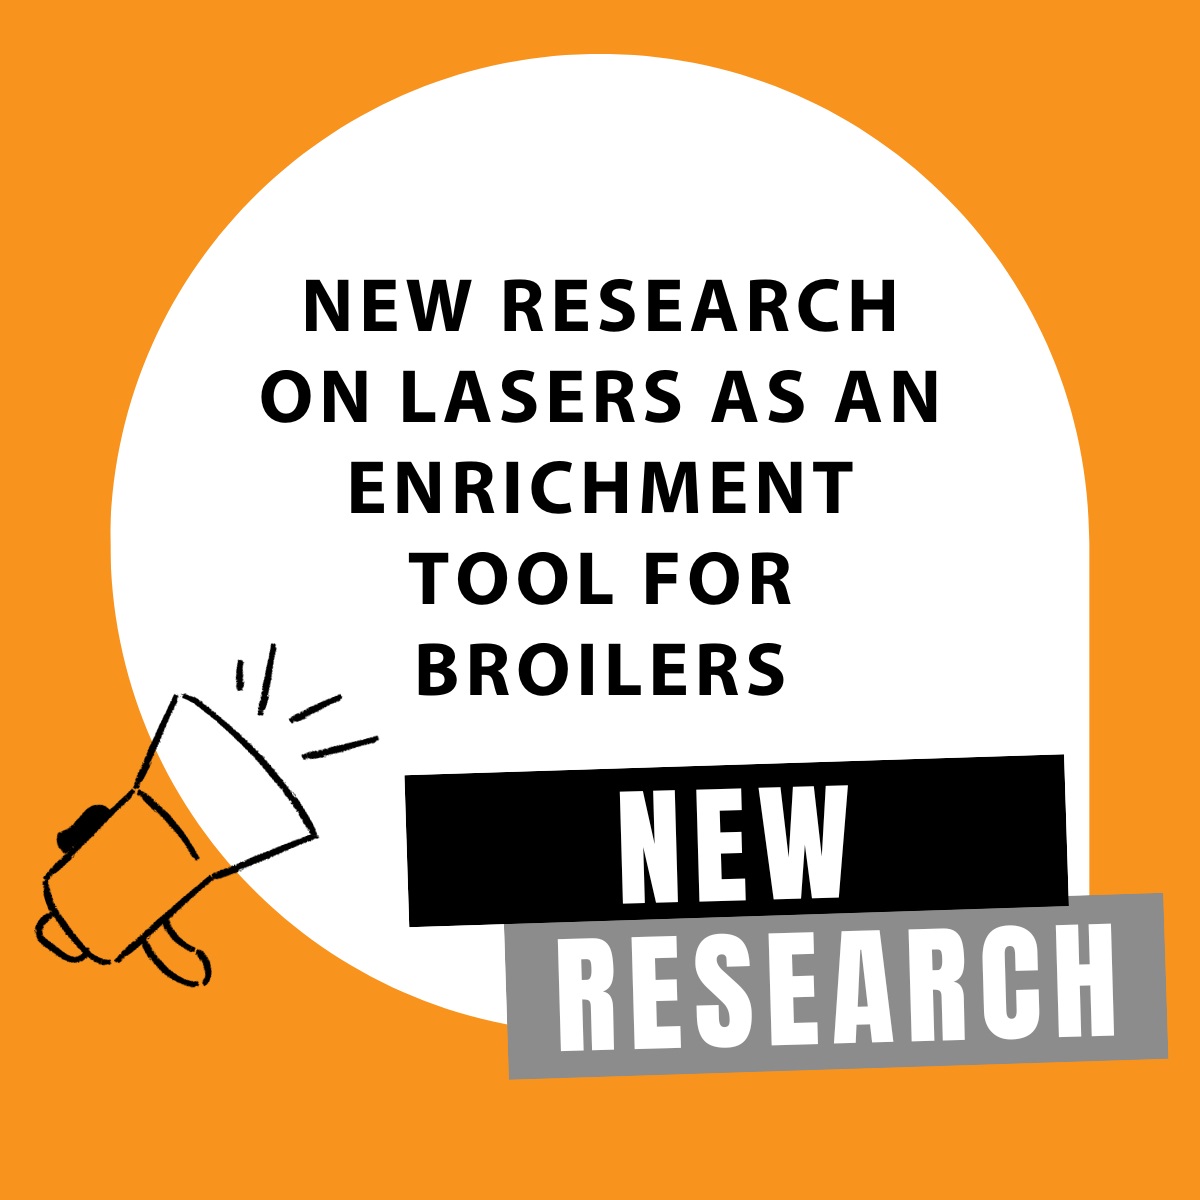 ONCE Animal Lighting Announces New Research on Lasers As an Enrichment Tool for Broilers